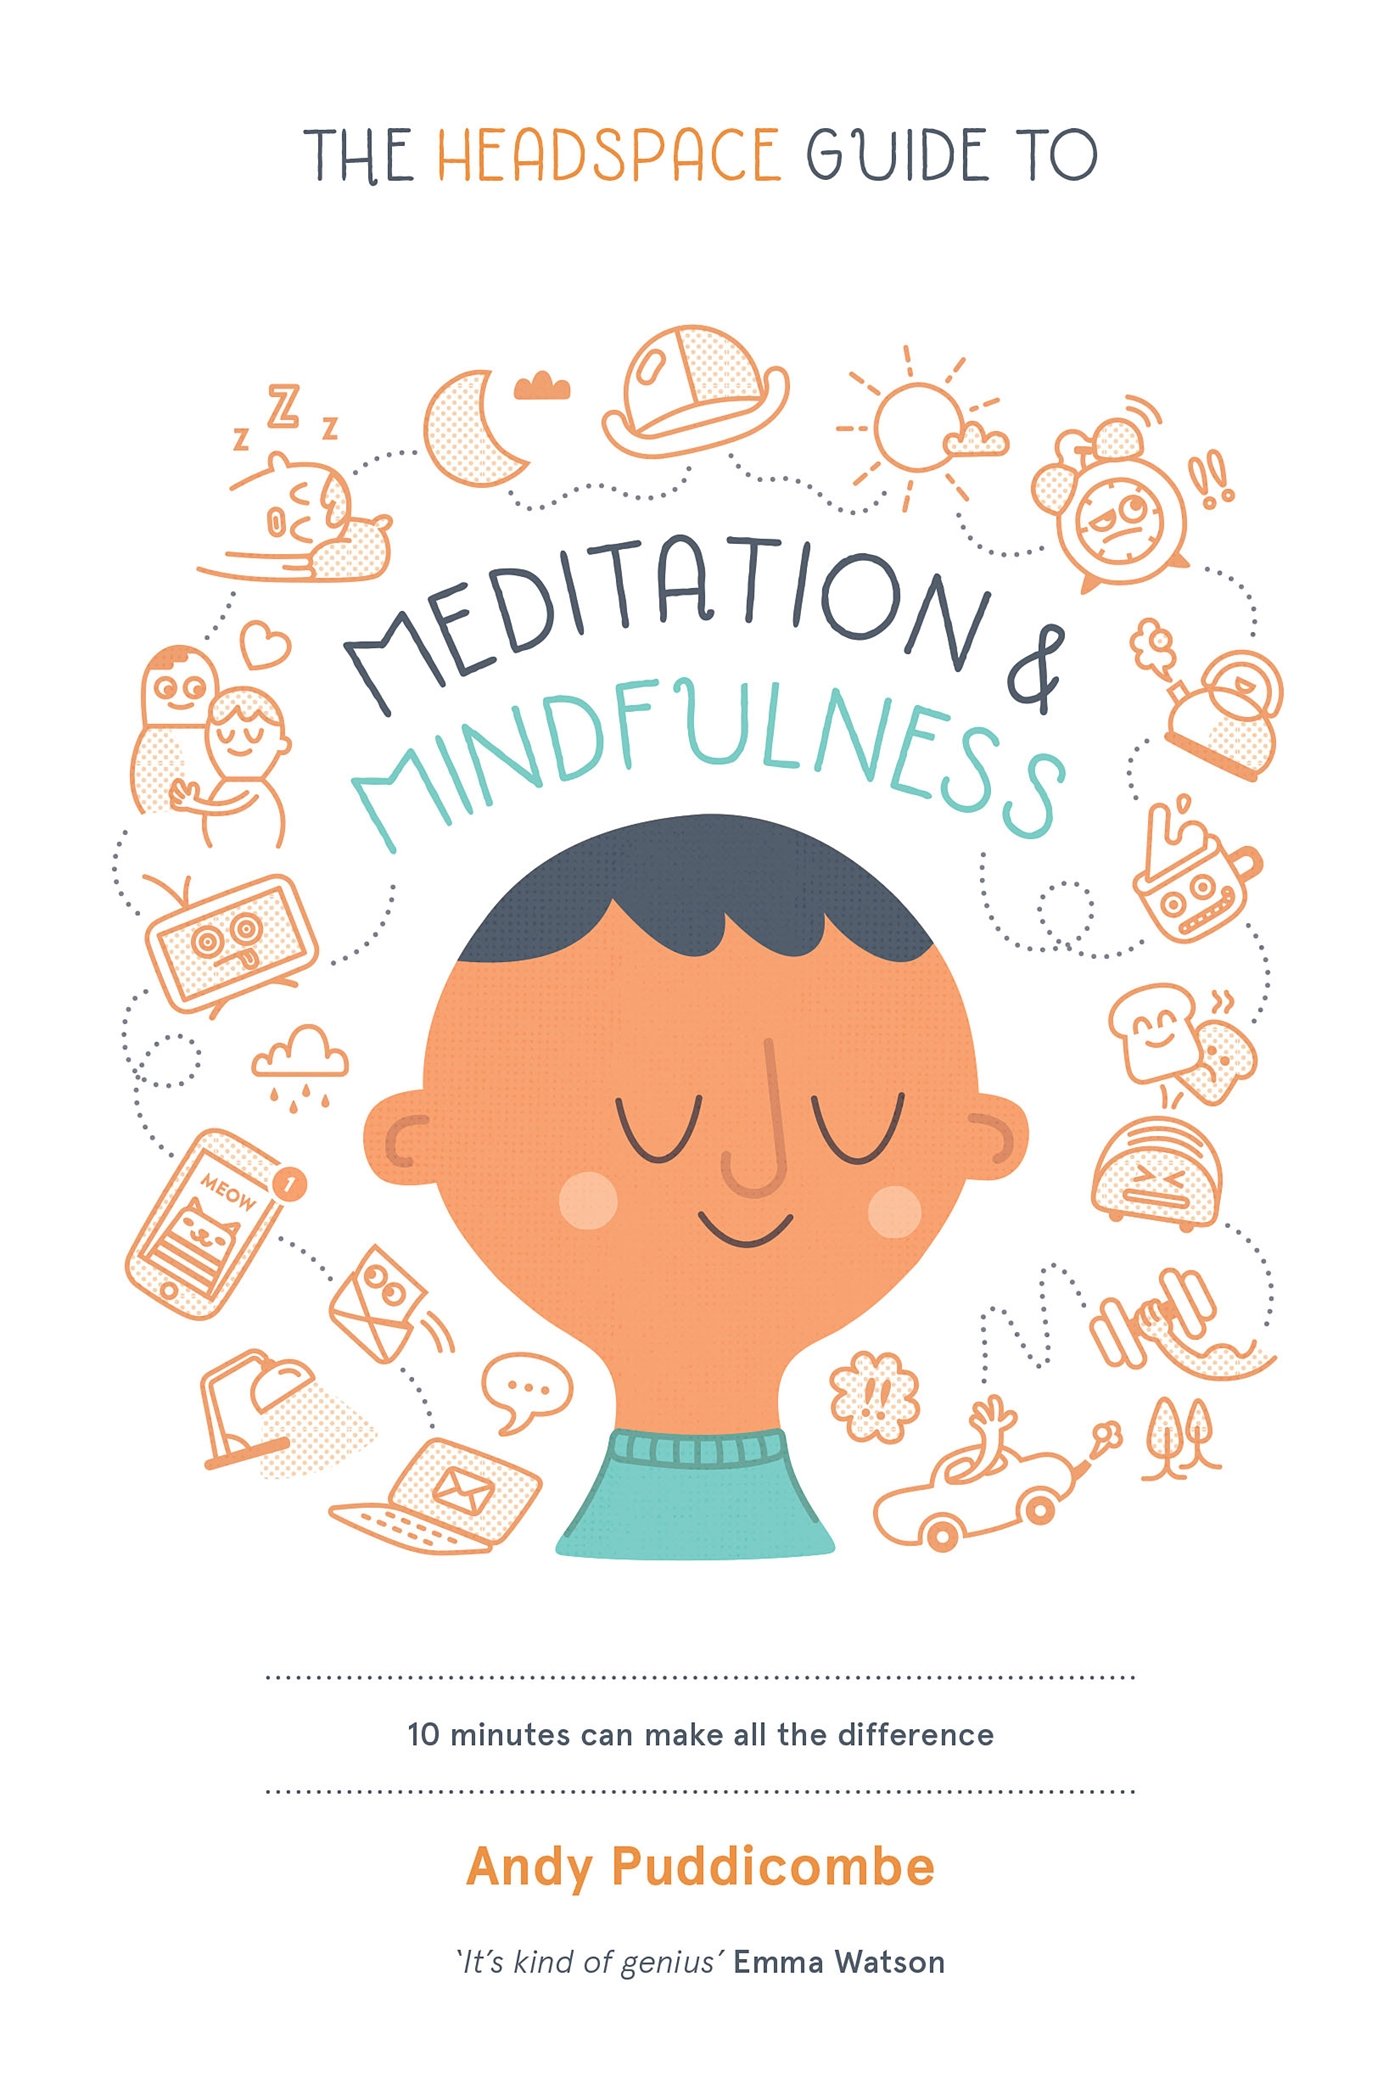 The Headspace Guide to Meditation and Mindfulness - Andy Puddicombe